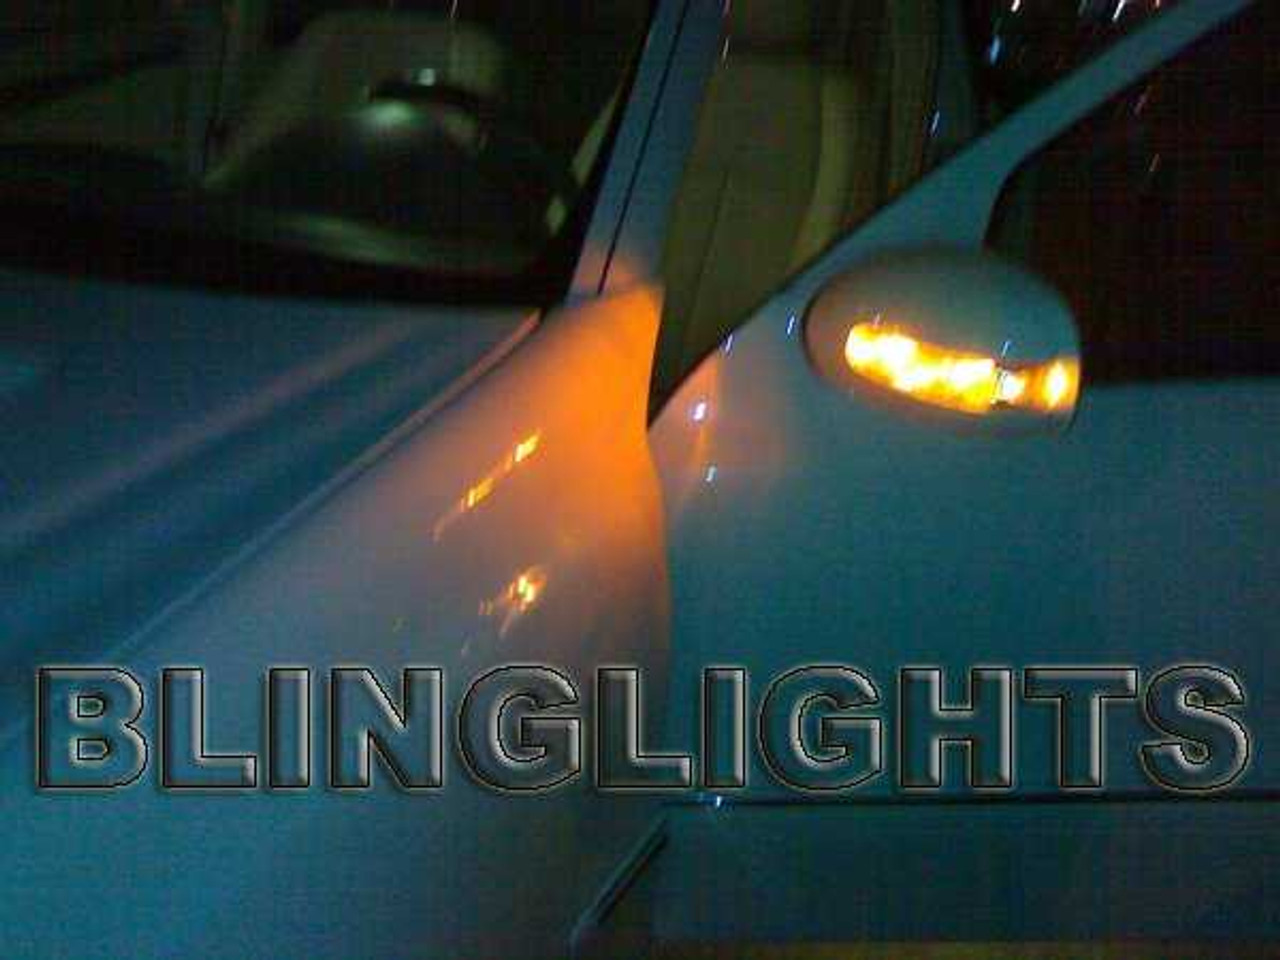 2000 2001 2002 Chevy Cavalier LED Side Mirrors Turnsignals Turn Signals Chevrolet Lamps Lights